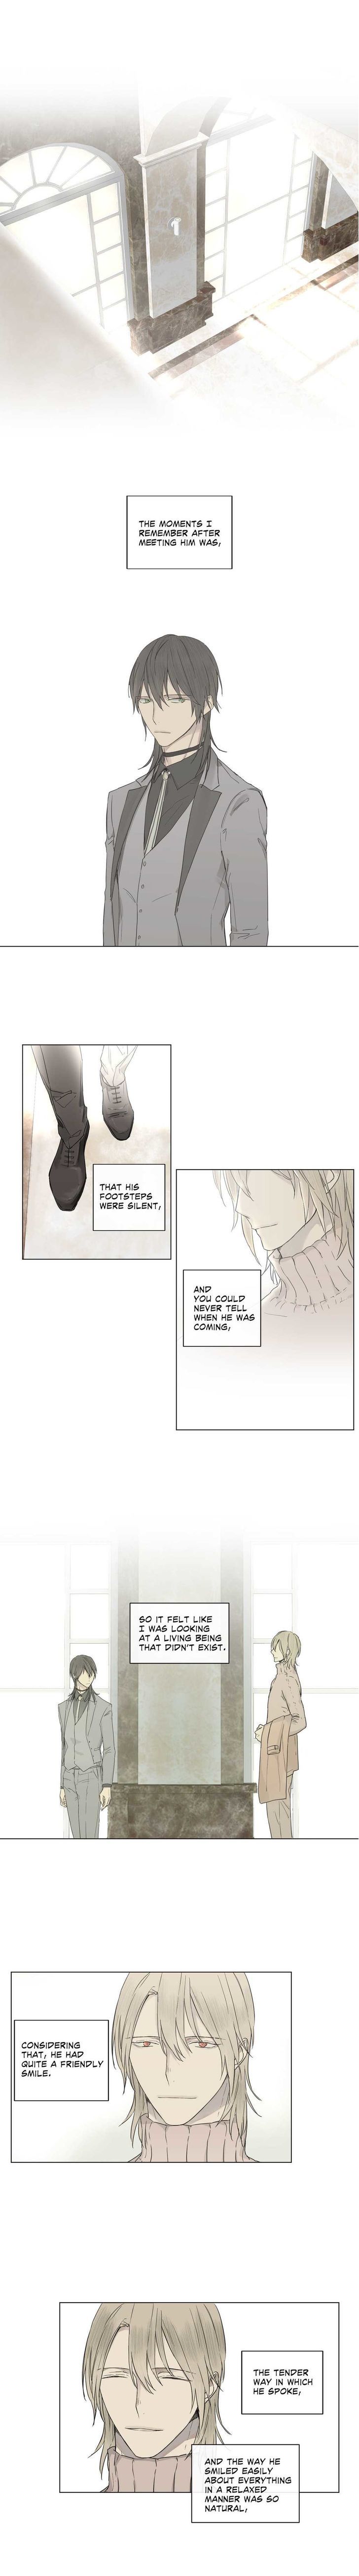 Royal Servant - Chapter 13 Page 1